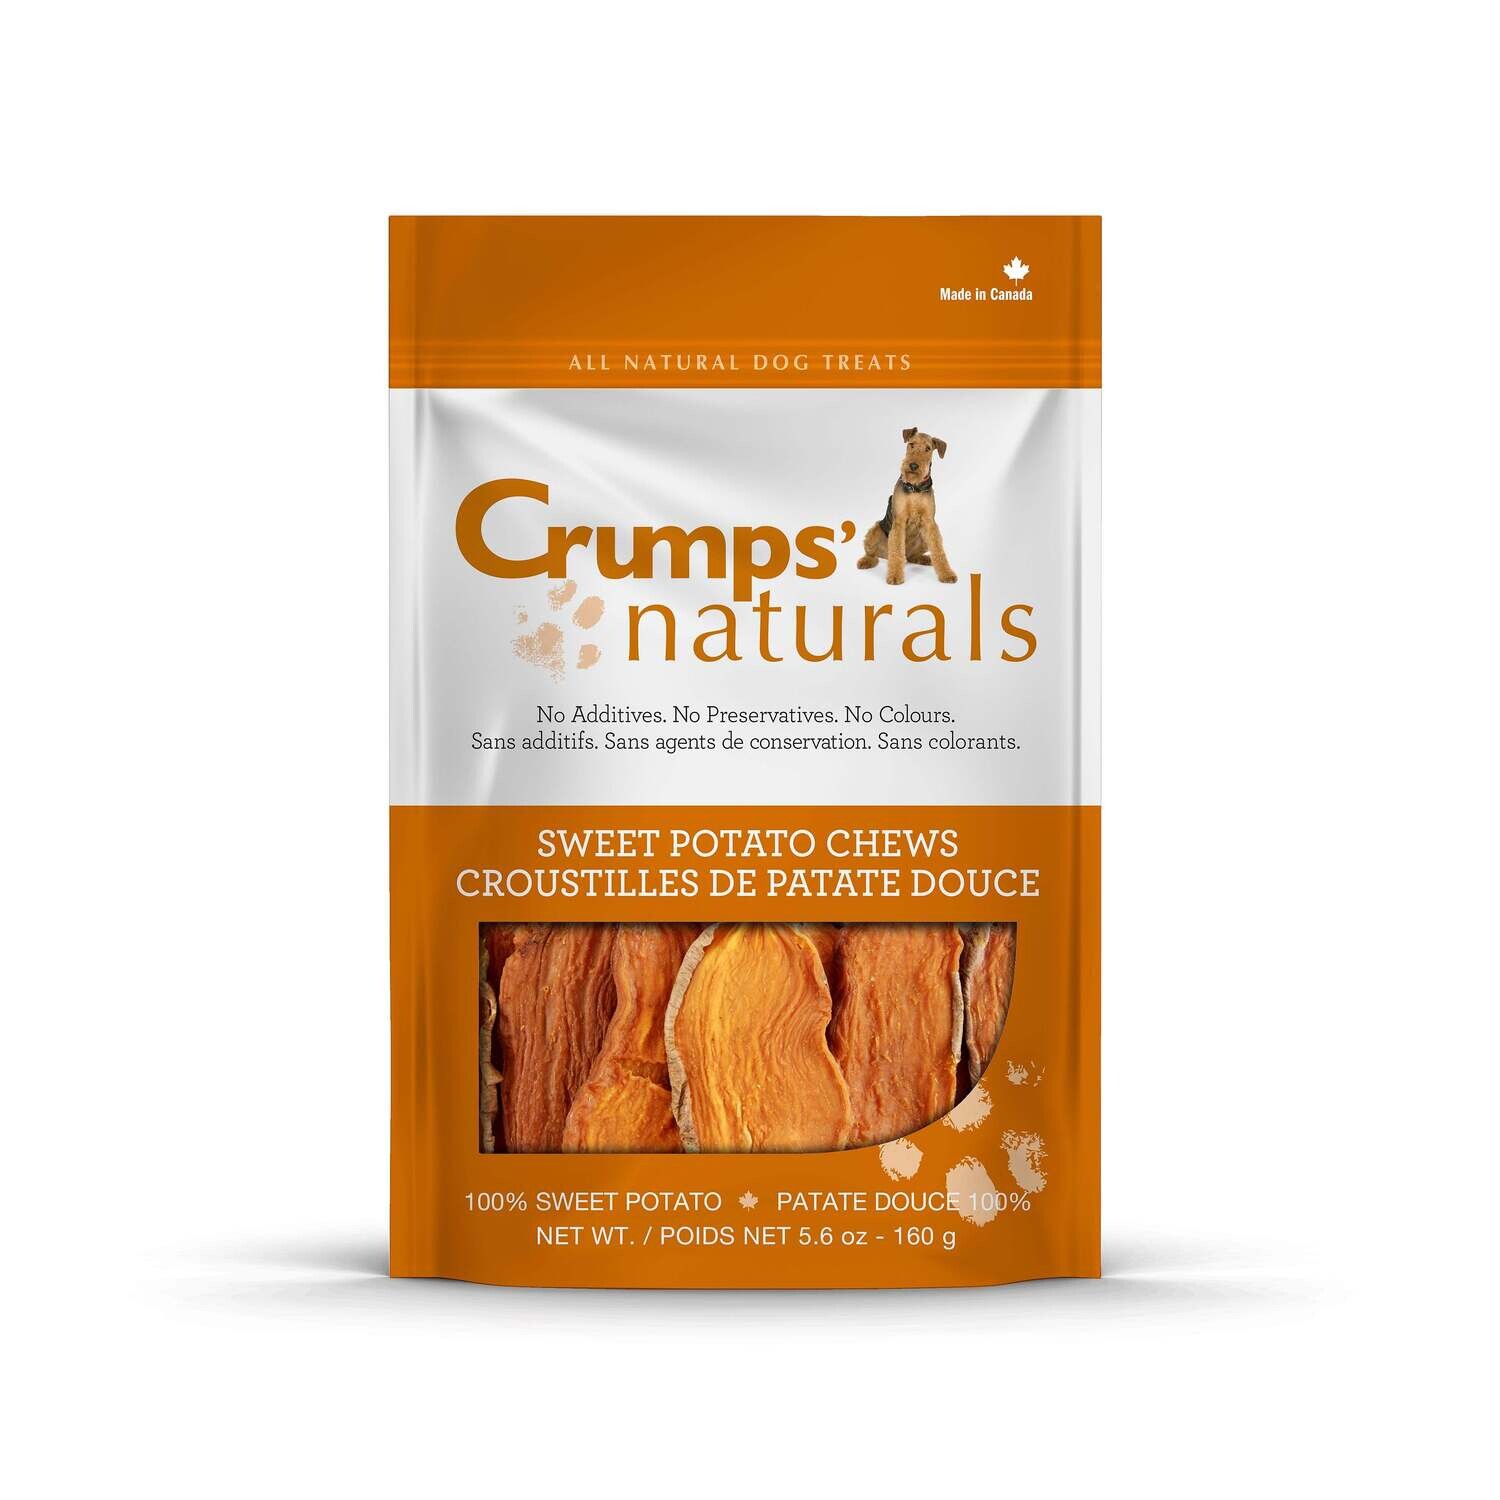 Crumps' Naturals Sweet Potato Chews for Dogs 160g - 地瓜片狗零食